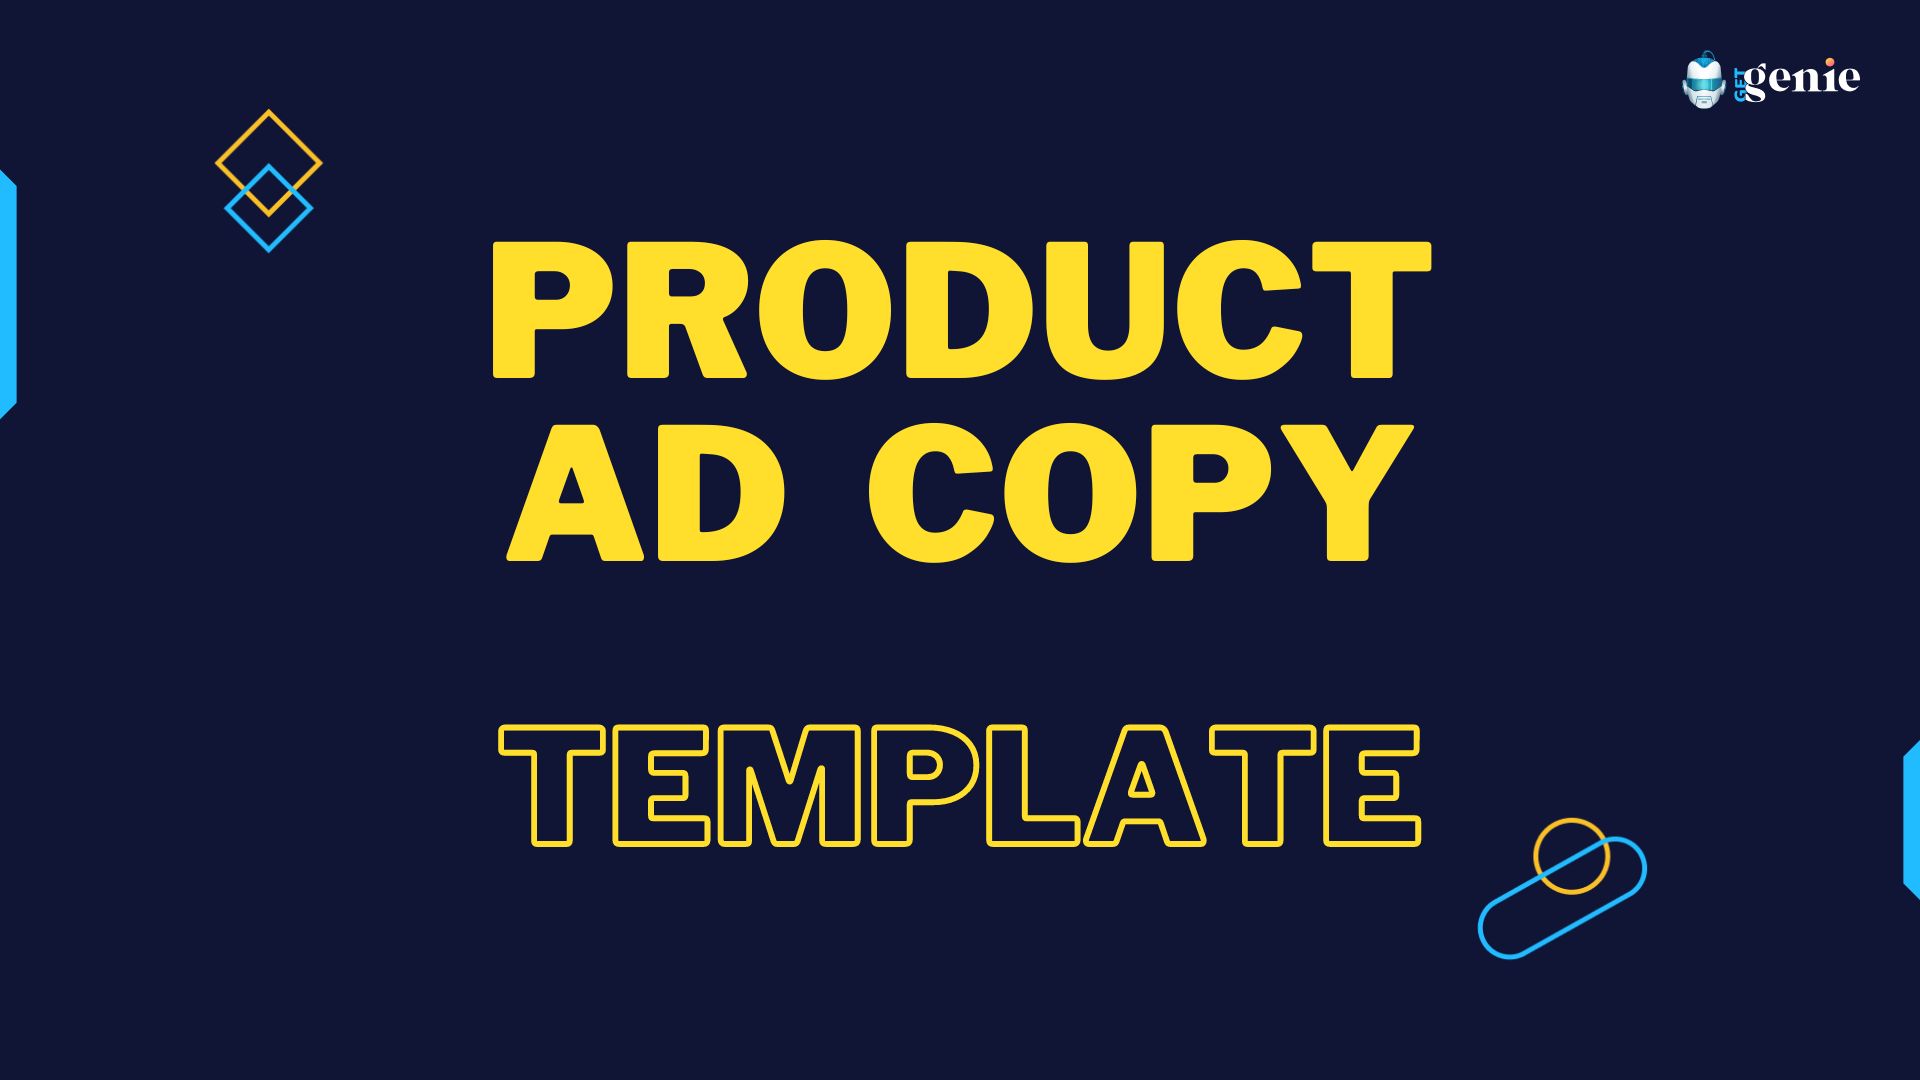 GetGenie - Your SEO and Content Assistant  - Product AD Copy Template - Wpmet, XpeedStudio